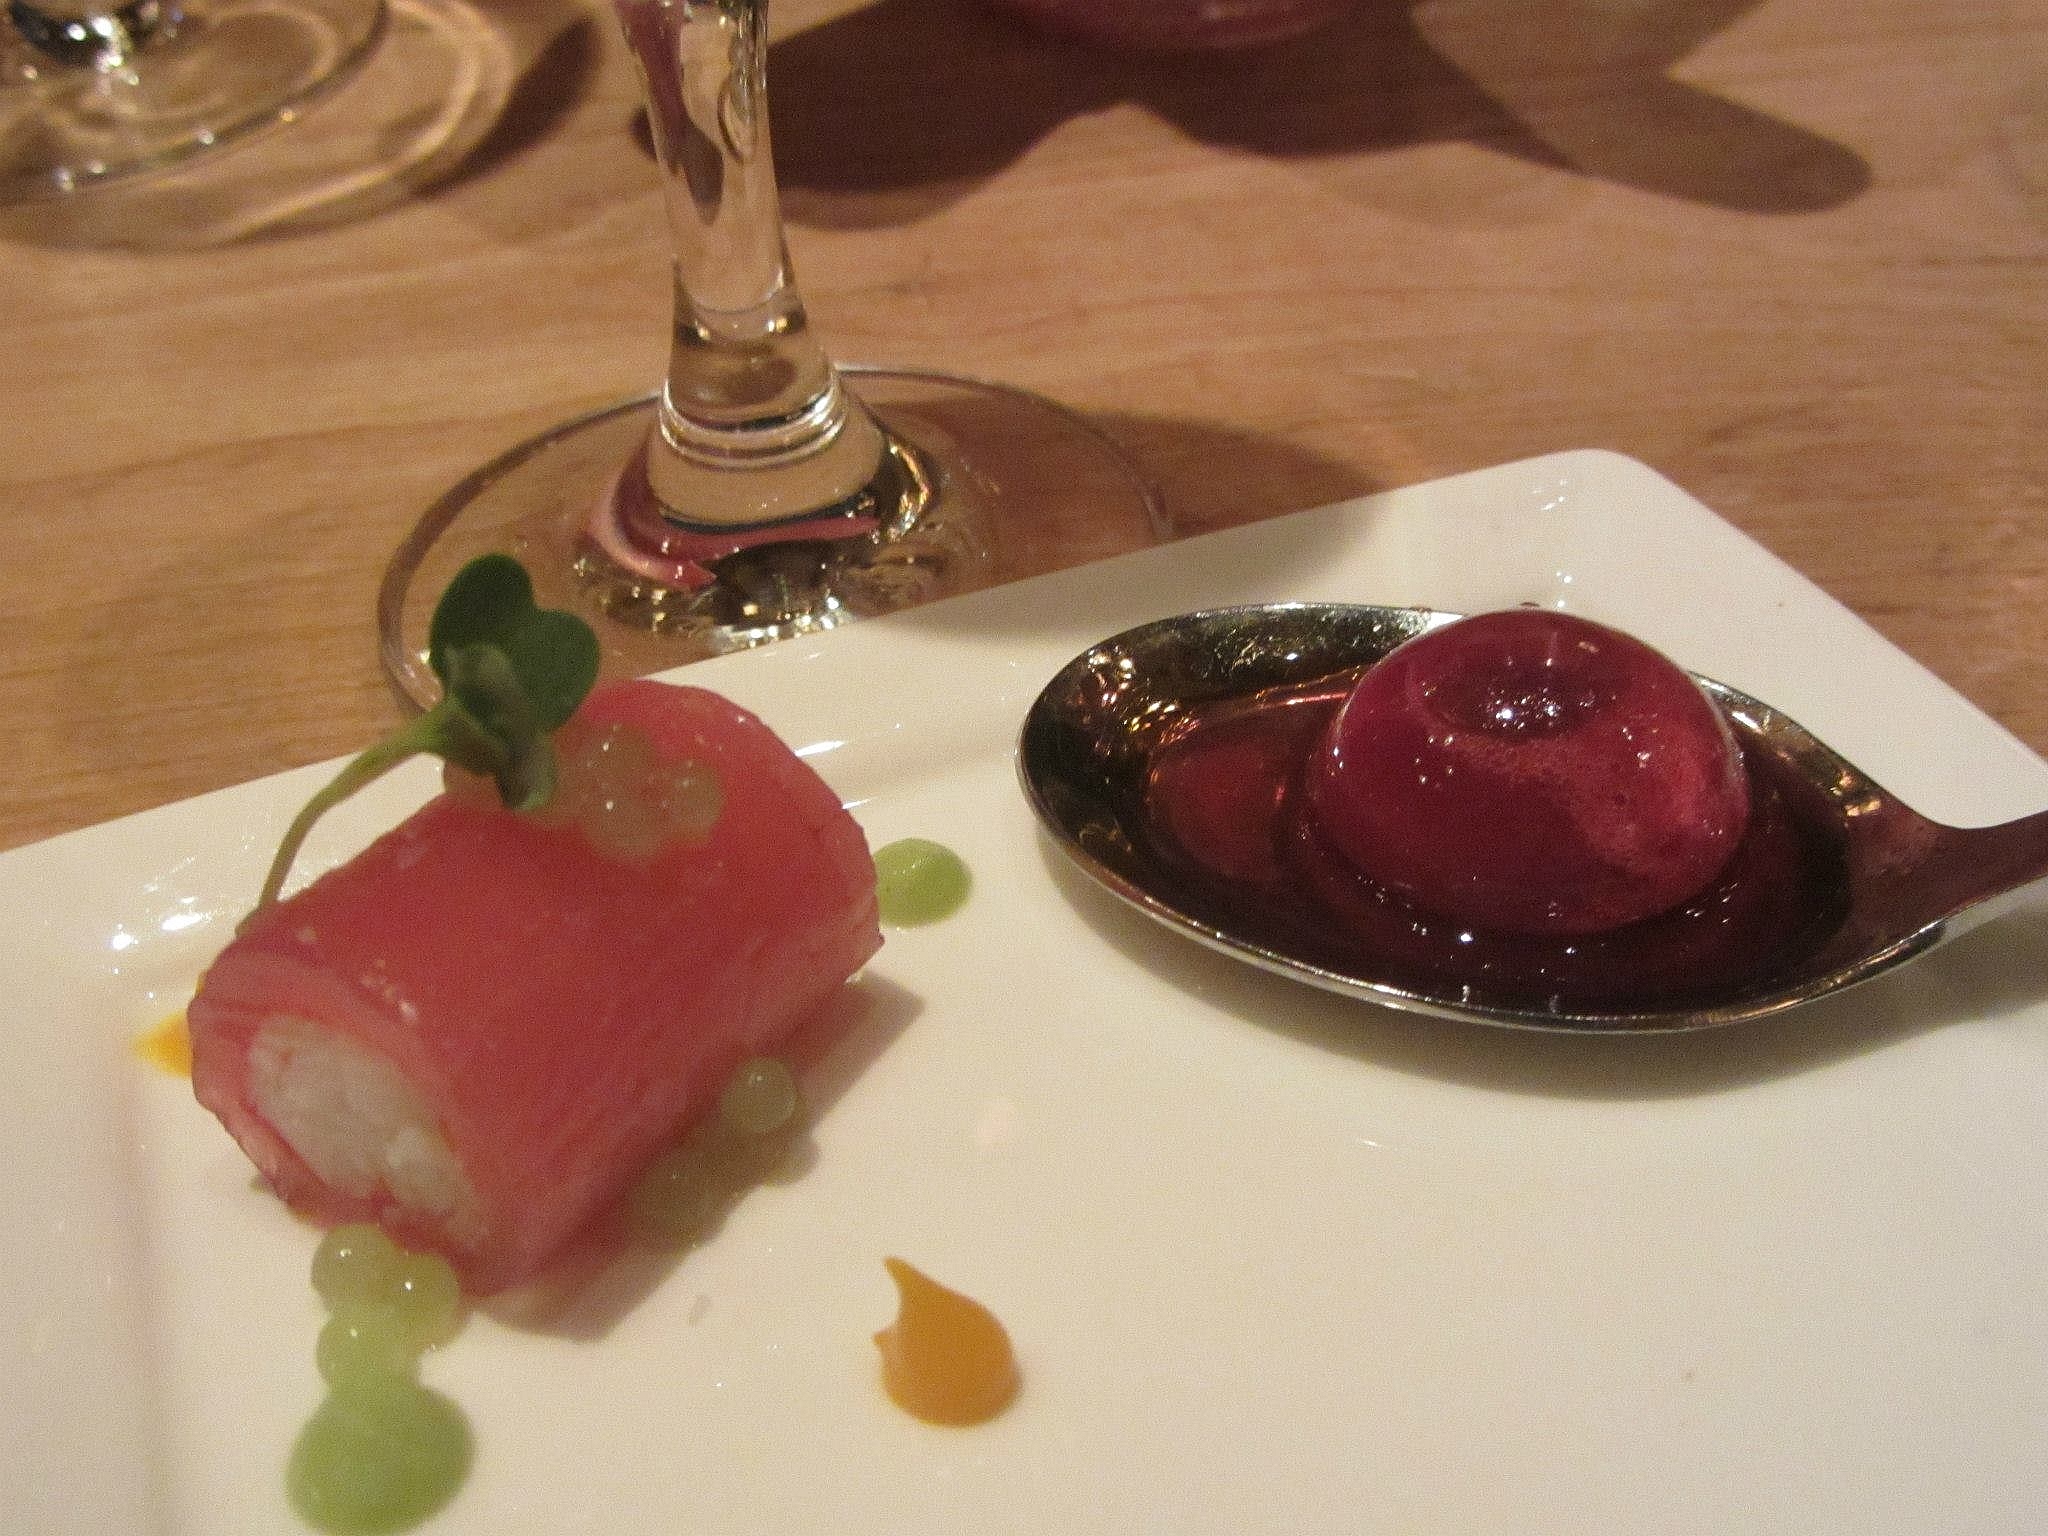 King crab and tuna roulade with green apple caviar and mango puree, and a "cherry bomb" with verjus. 